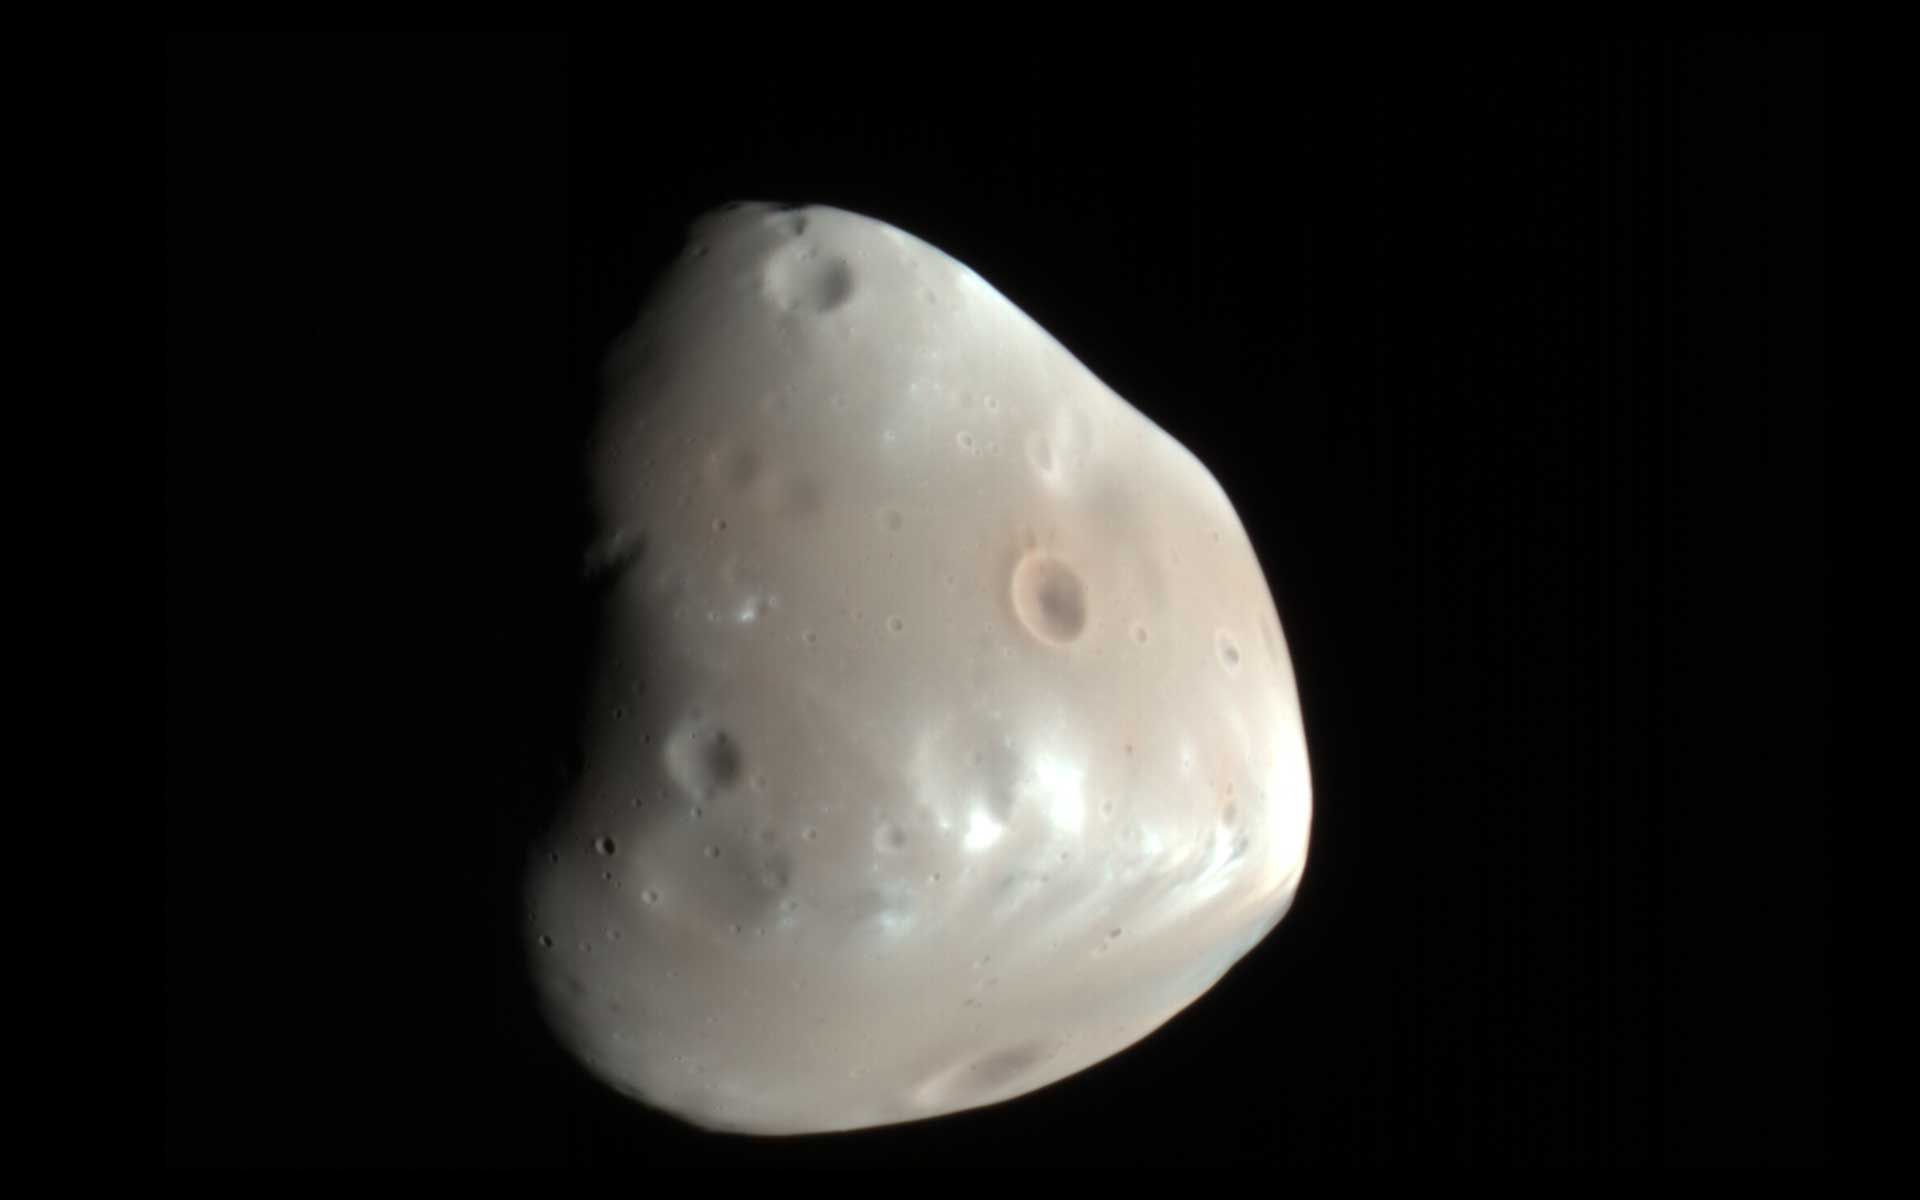 A color-enhanced image of Mars' moon Deimos. Deimos has a smooth surface except for the most recent impact craters. It is a dark, reddish object.